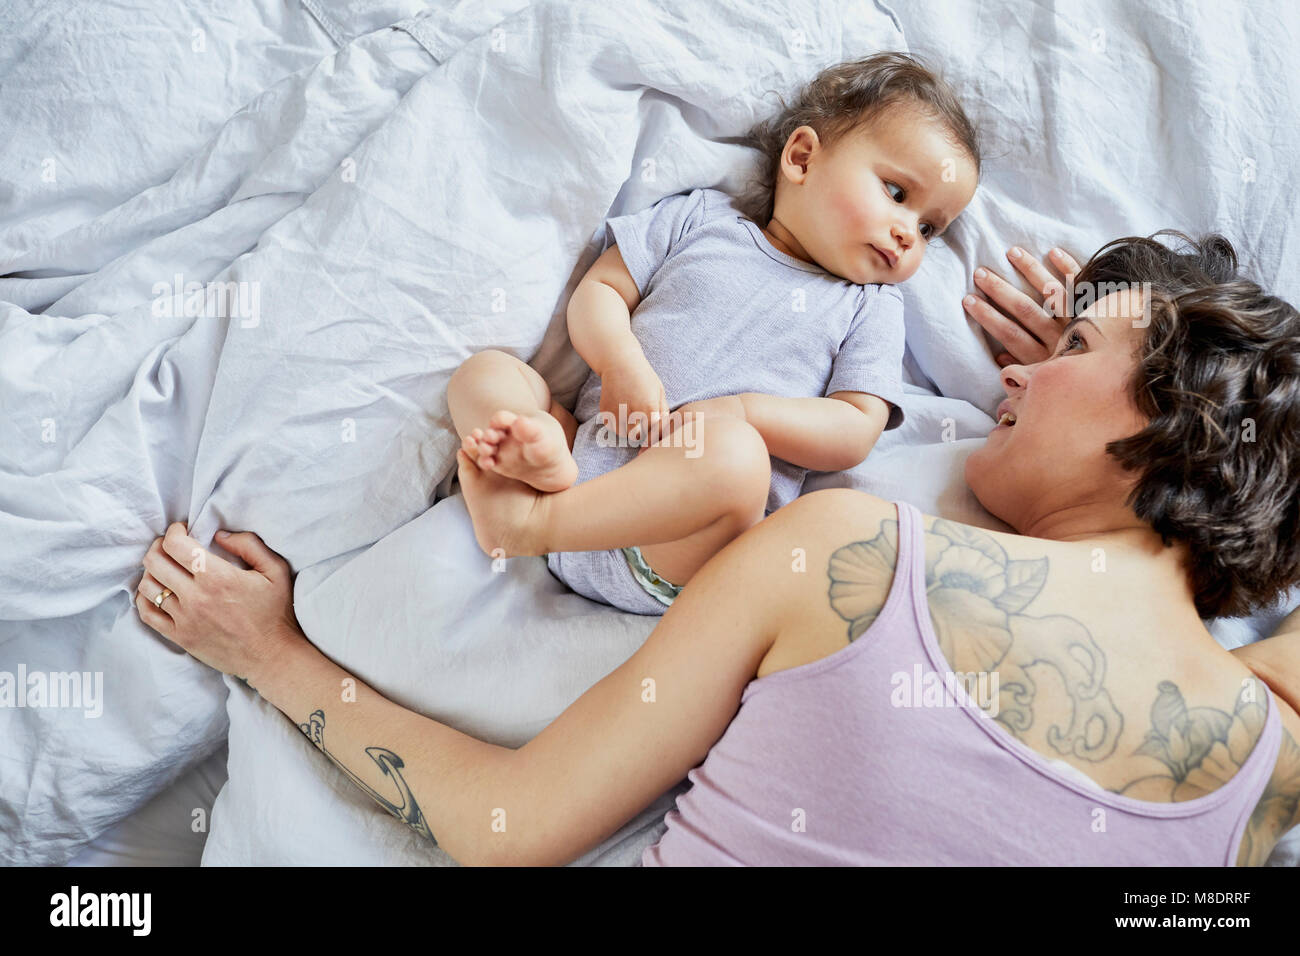 Mother and baby girl, lying on bed together Stock Photo